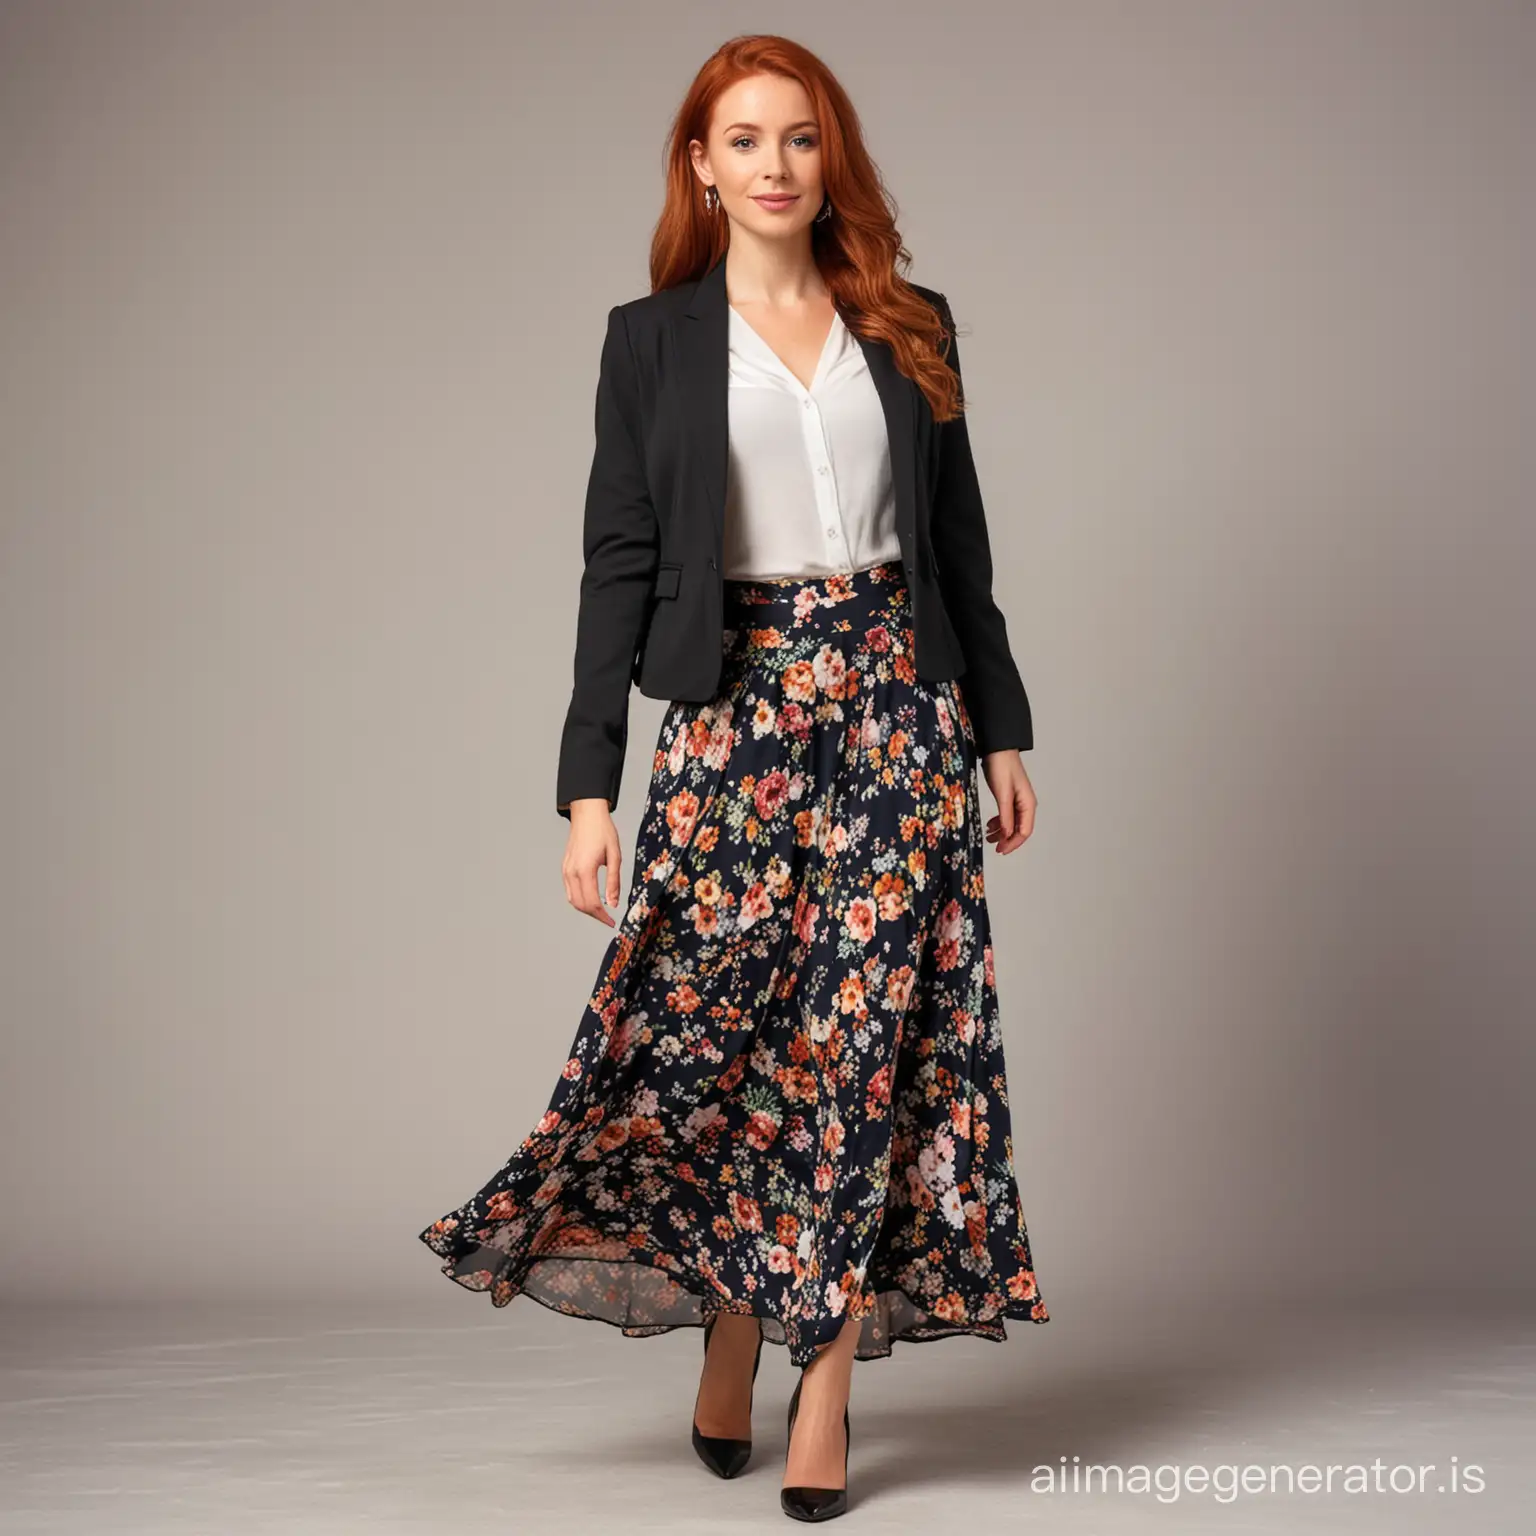 attractive petite redhead businesswoman full body floral maxi skirt wearing a jacket